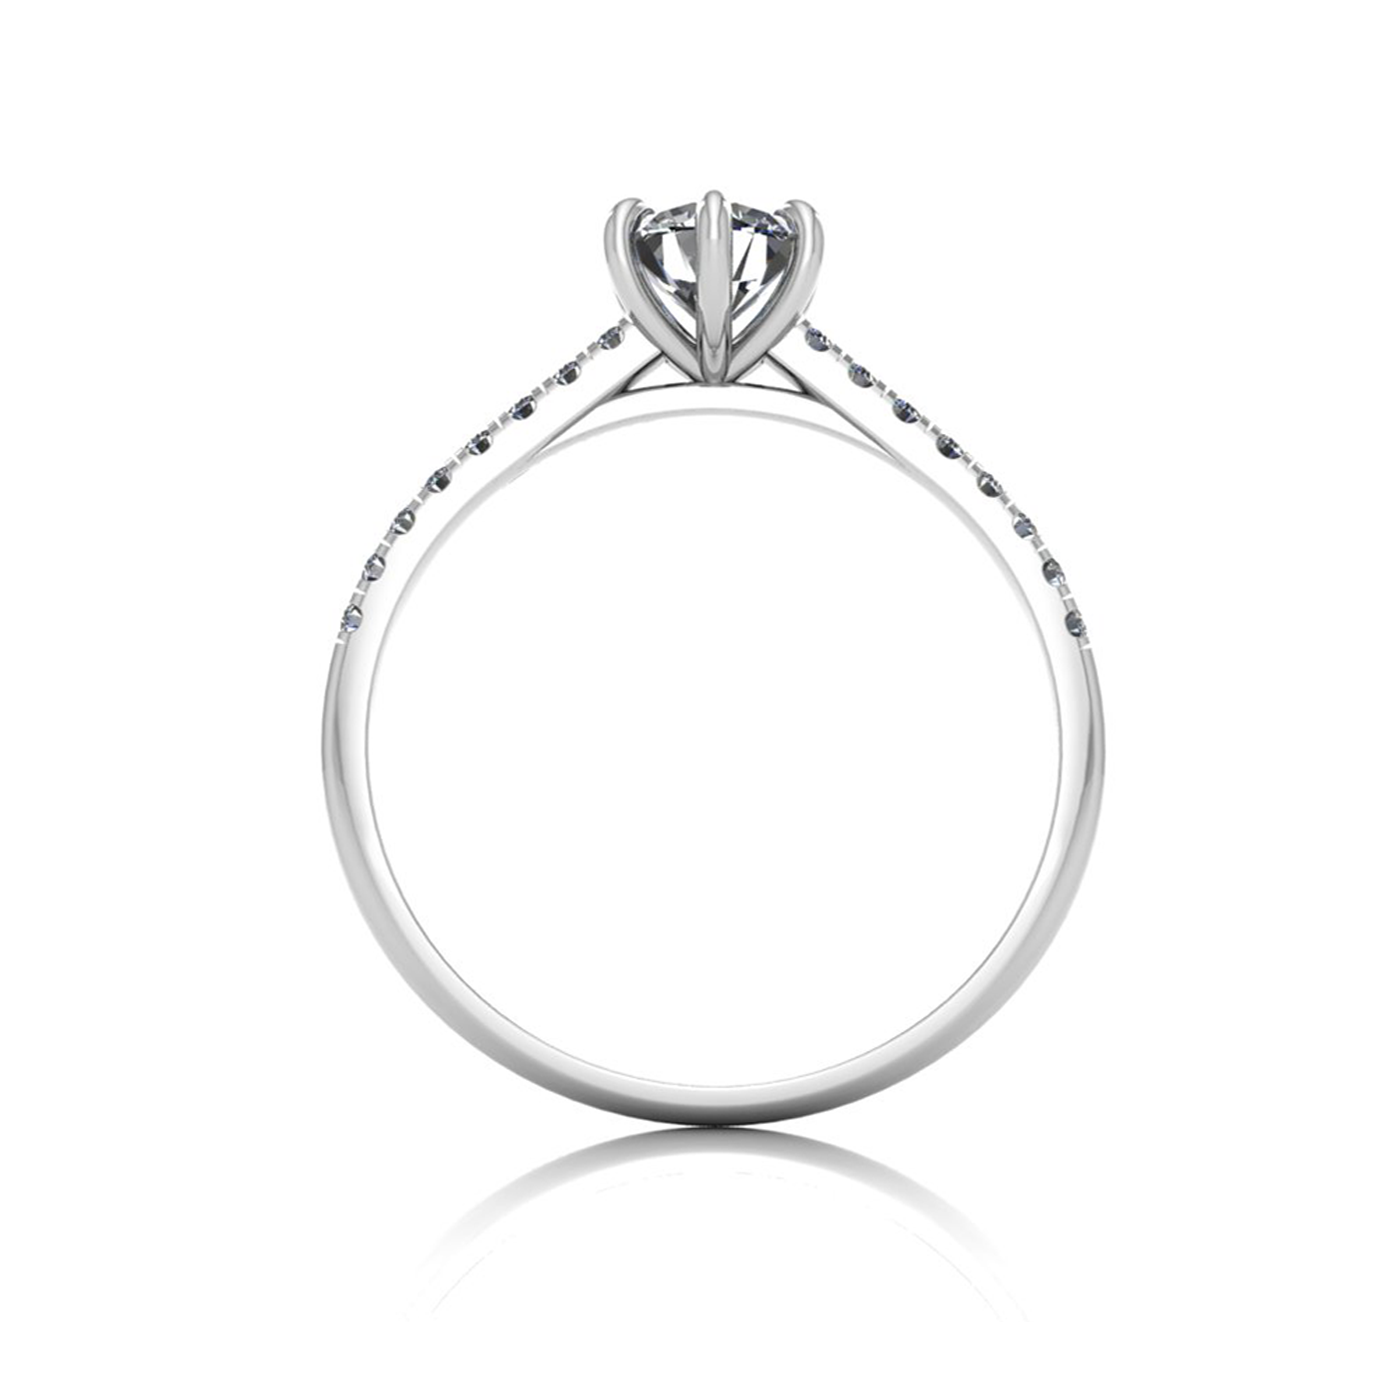 18k white gold 0,50 ct 6 prongs round cut diamond engagement ring with whisper thin pavÉ set band